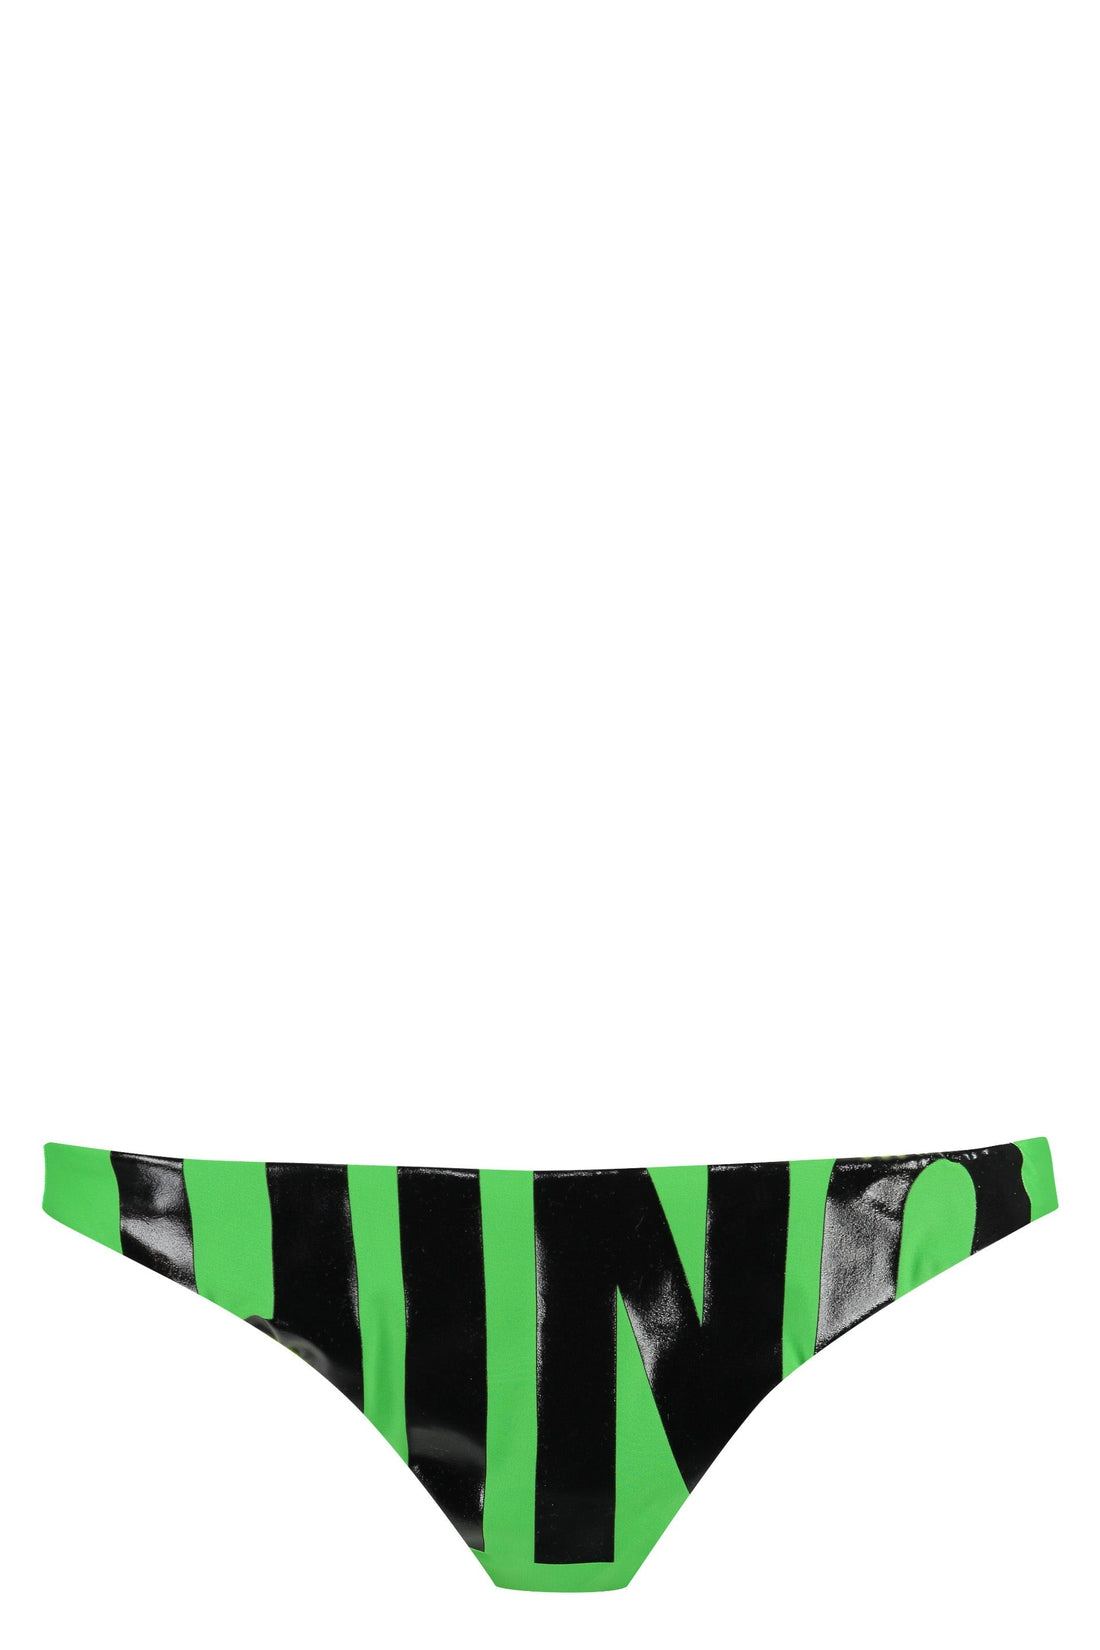 Moschino-OUTLET-SALE-printed bikini hipster-ARCHIVIST